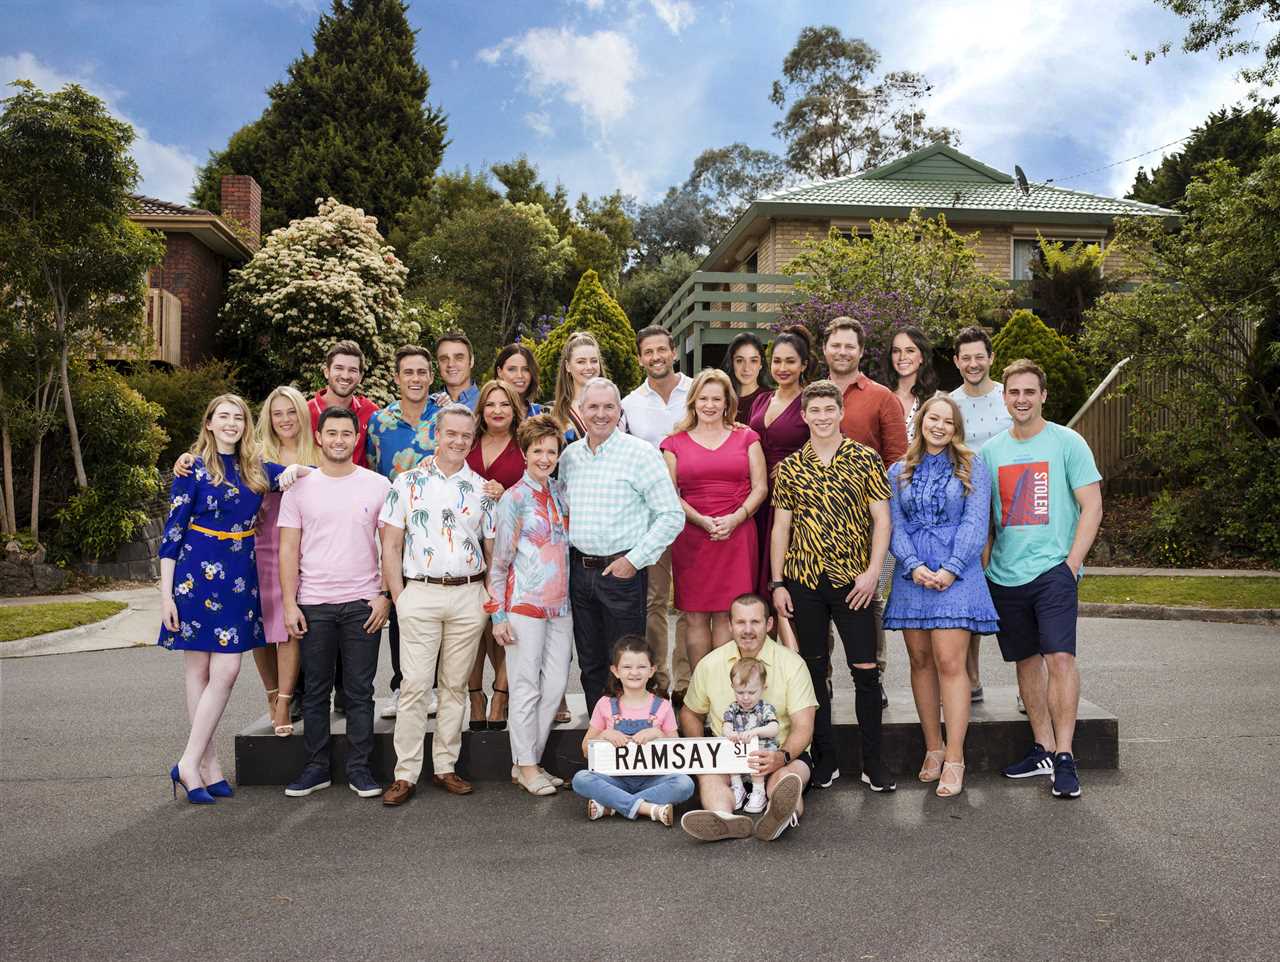 Neighbours drops first trailer for explosive finale as legends return for Ramsay Street for last ever episode